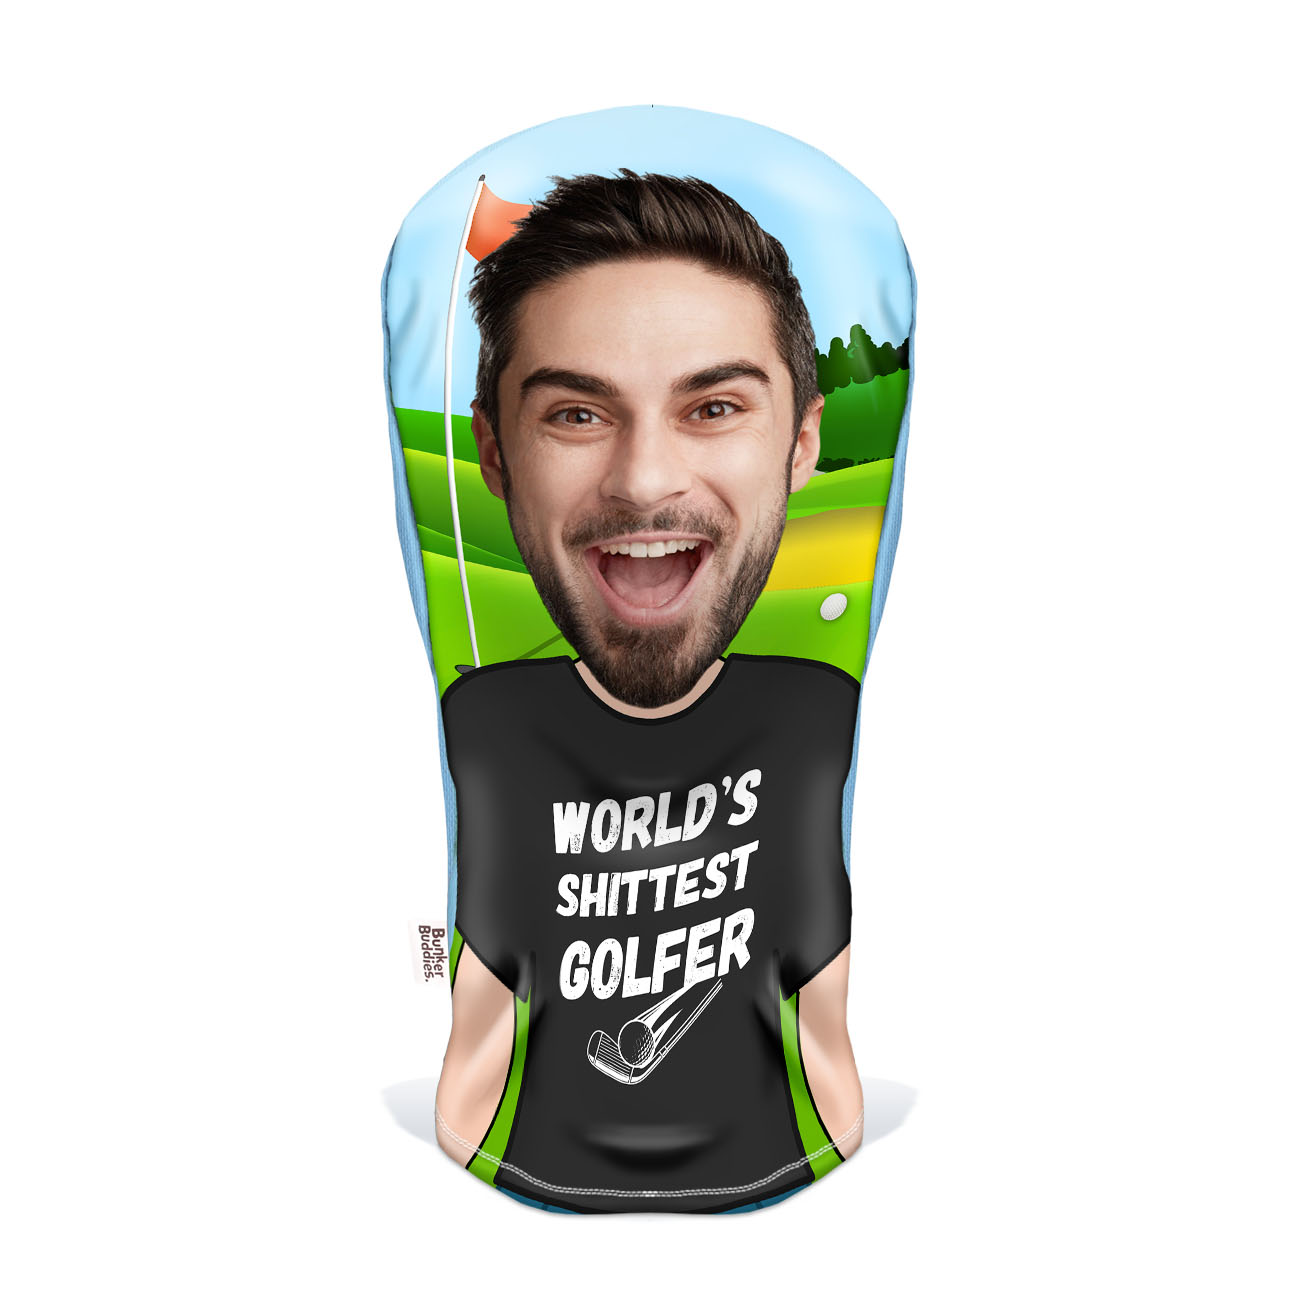 World's Shittest Golfer Personalised Golf Head Cover